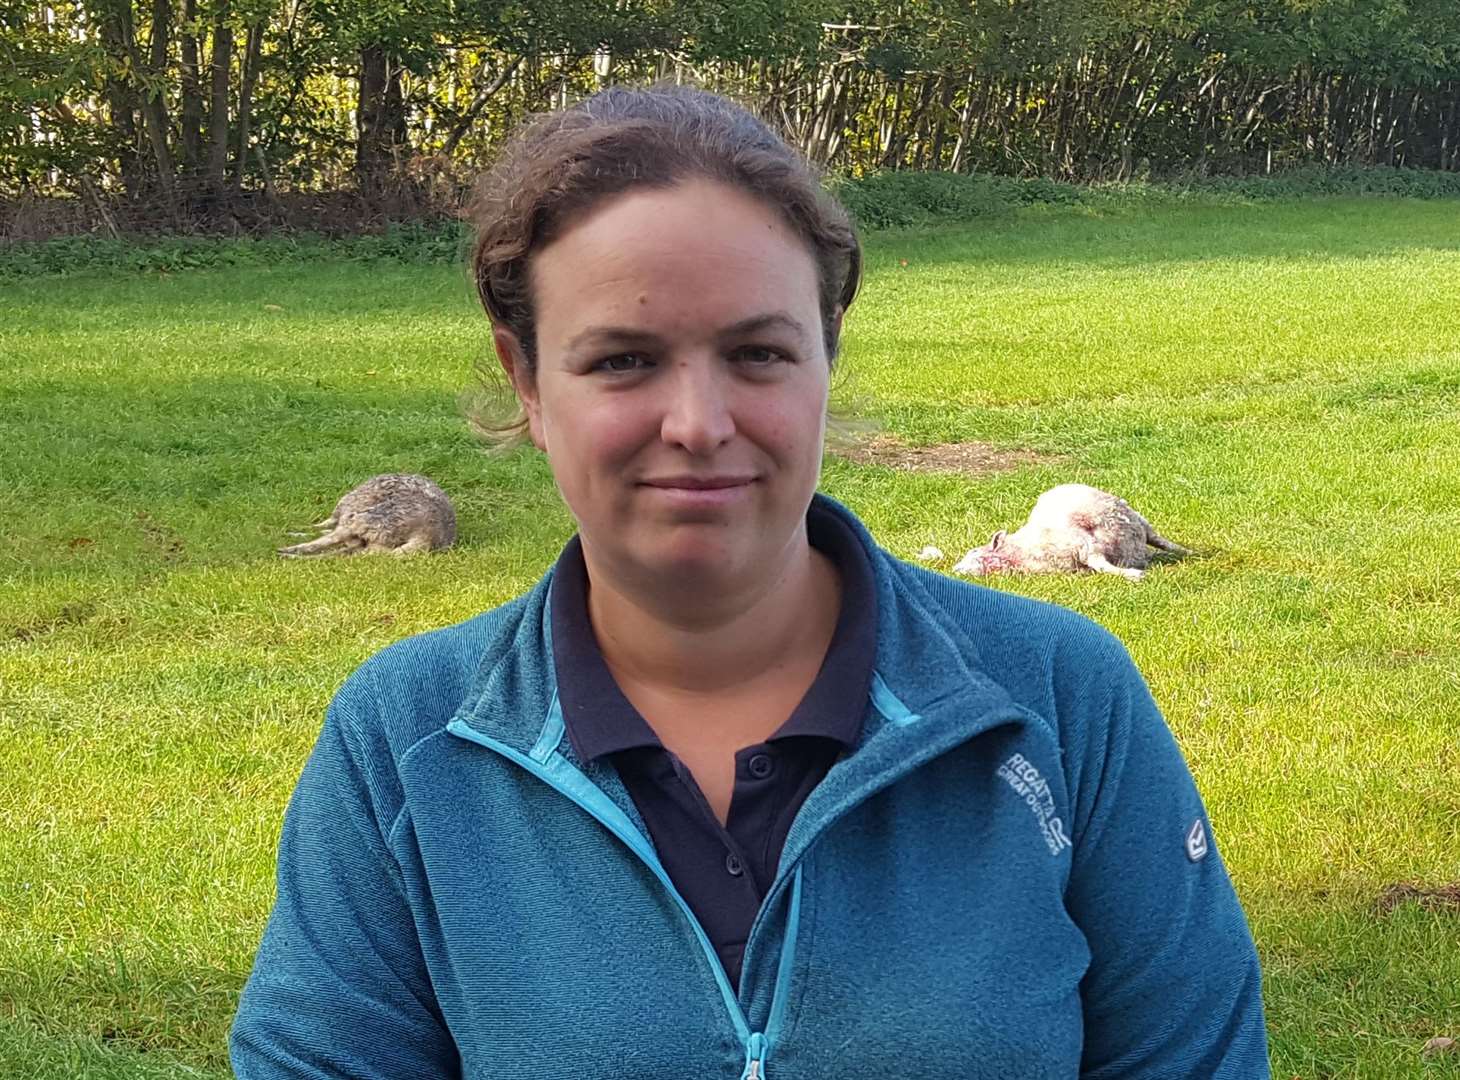 Sheep farmer Verity Garrett with dead sheep in her field following a previous dog attack in 2019